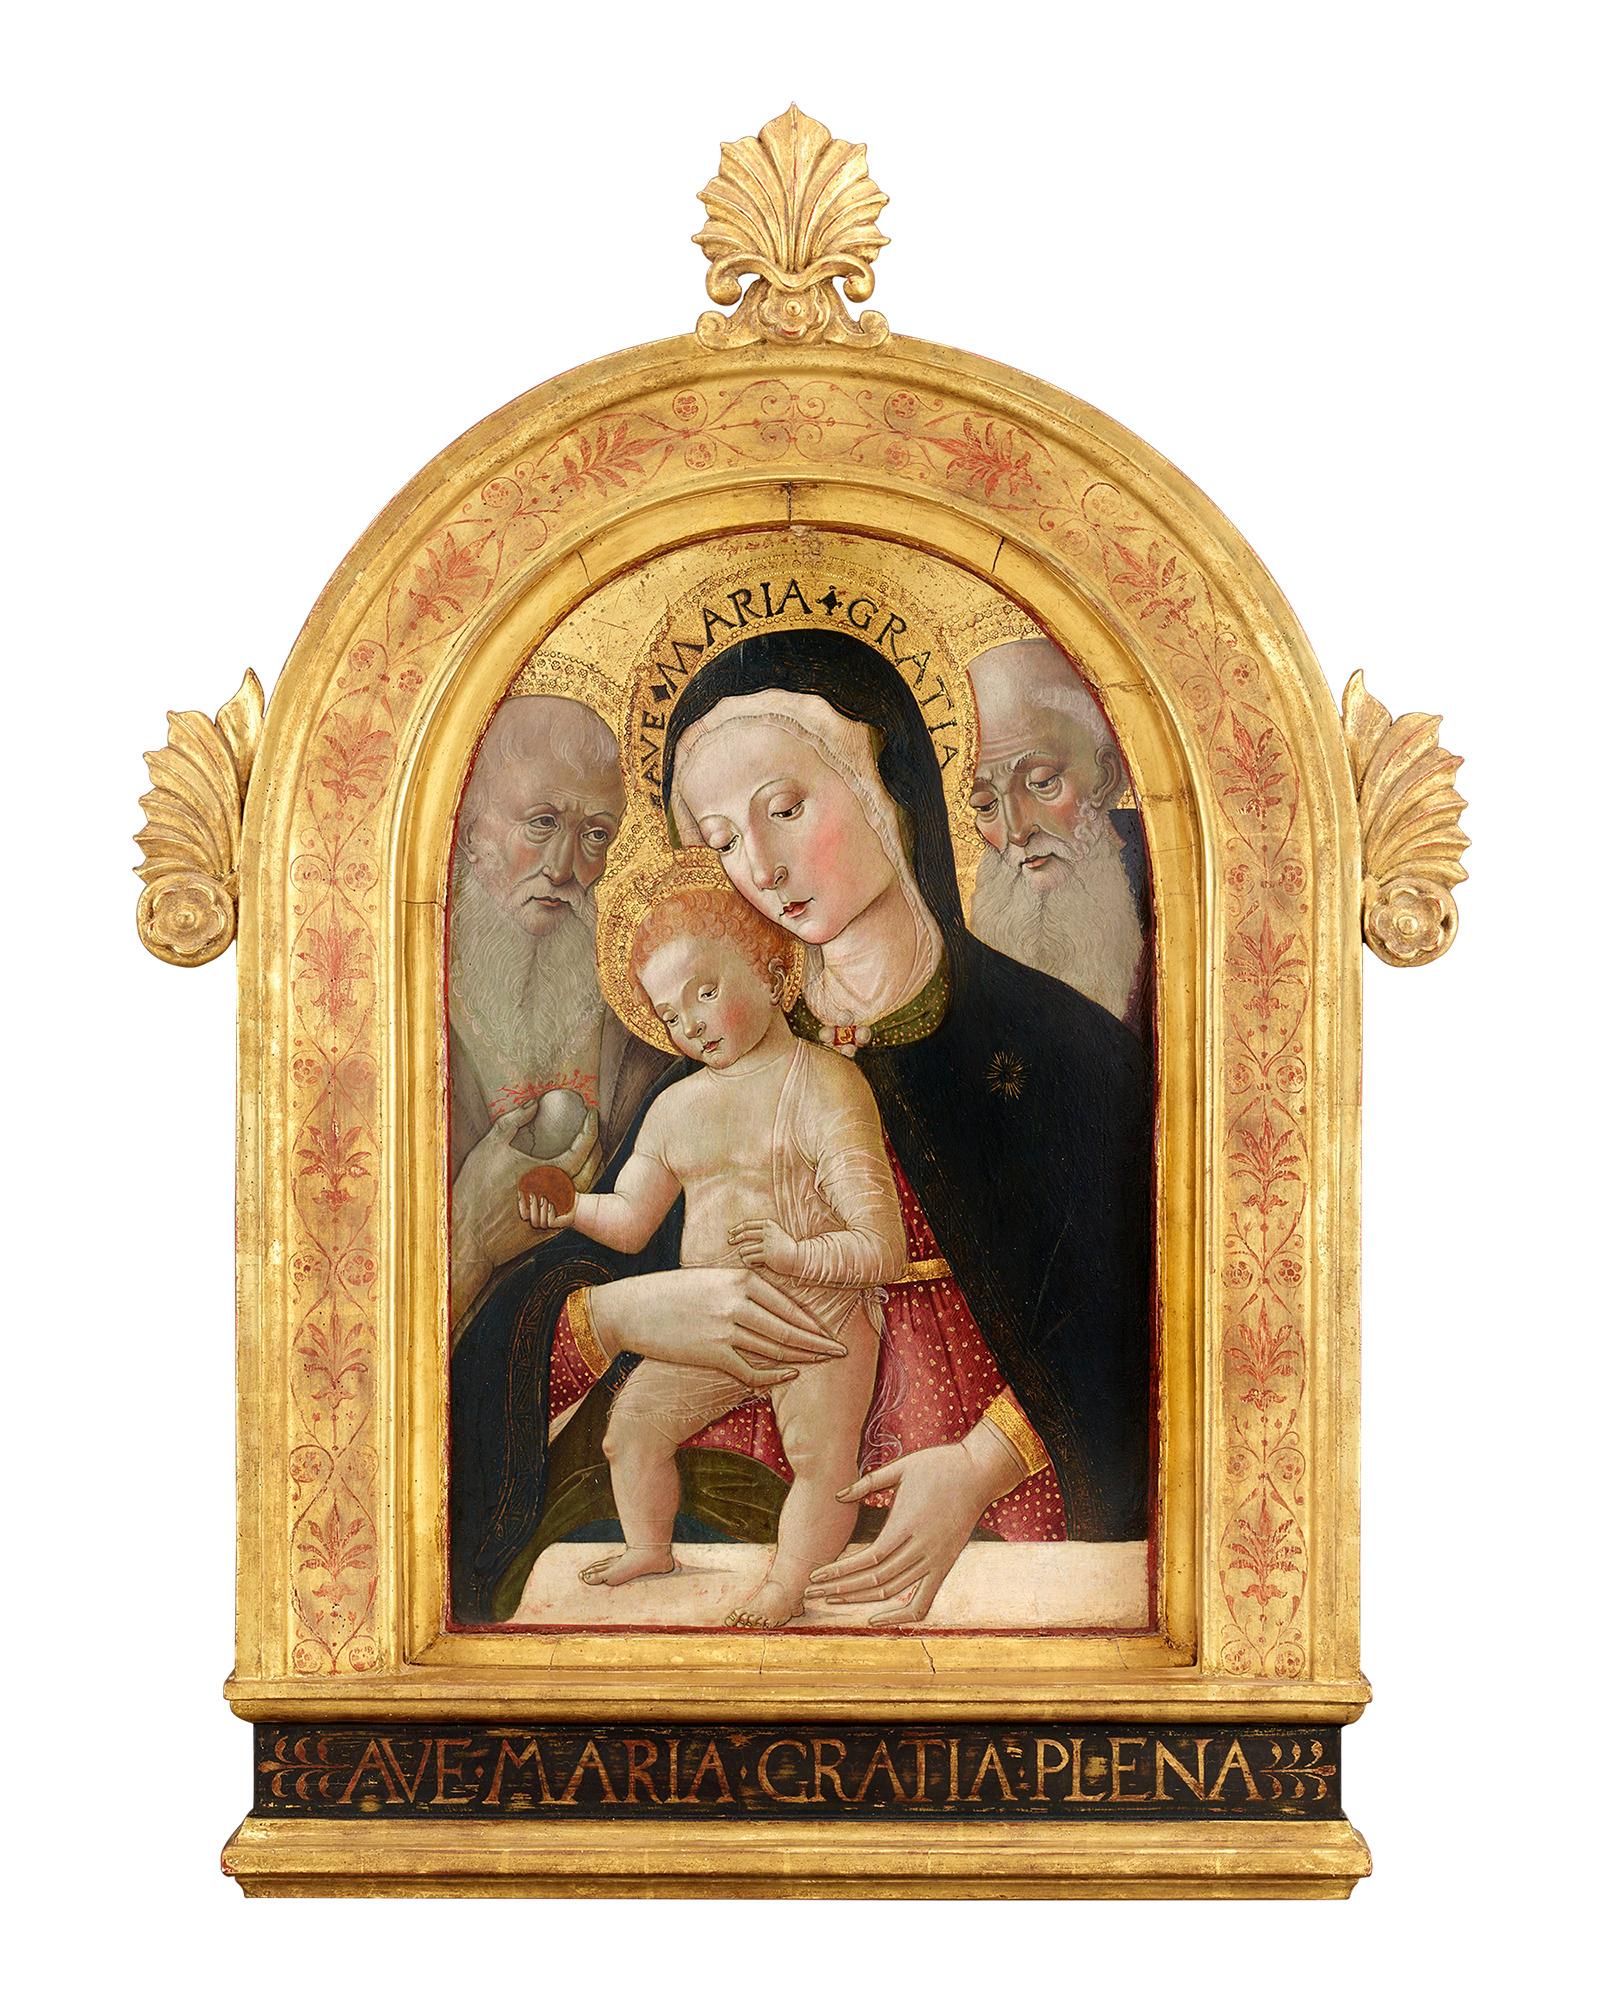 Benvenuto di Giovanni Portrait Painting - Virgin and Child with Saints Jerome and Bernard by Giovanni